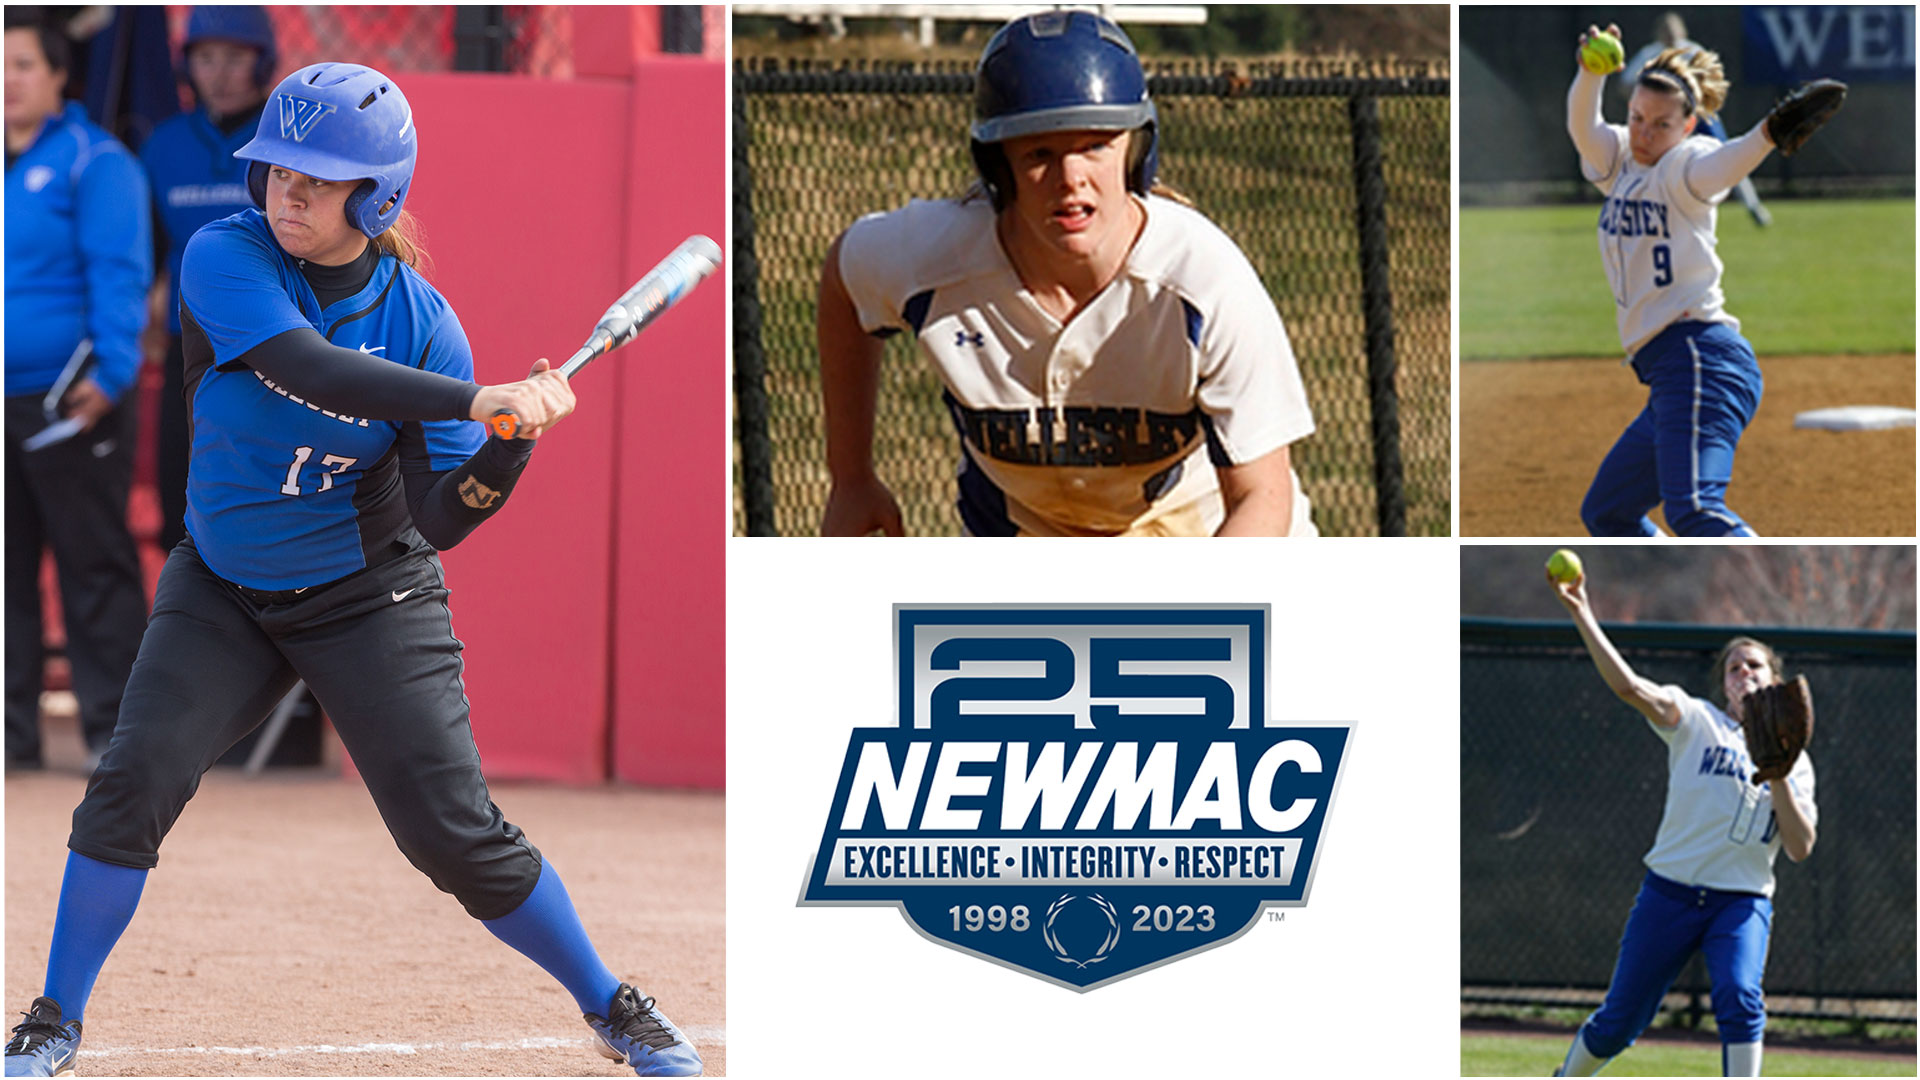 Four Wellesley softball student-athletes made the 25 Year All-NEWMAC Softball Team. Left to right: Carly Bresee '16, Lauren Goldfarb '13, Jenna Harvey '08 (top), Megan Wood '10 (bottom)